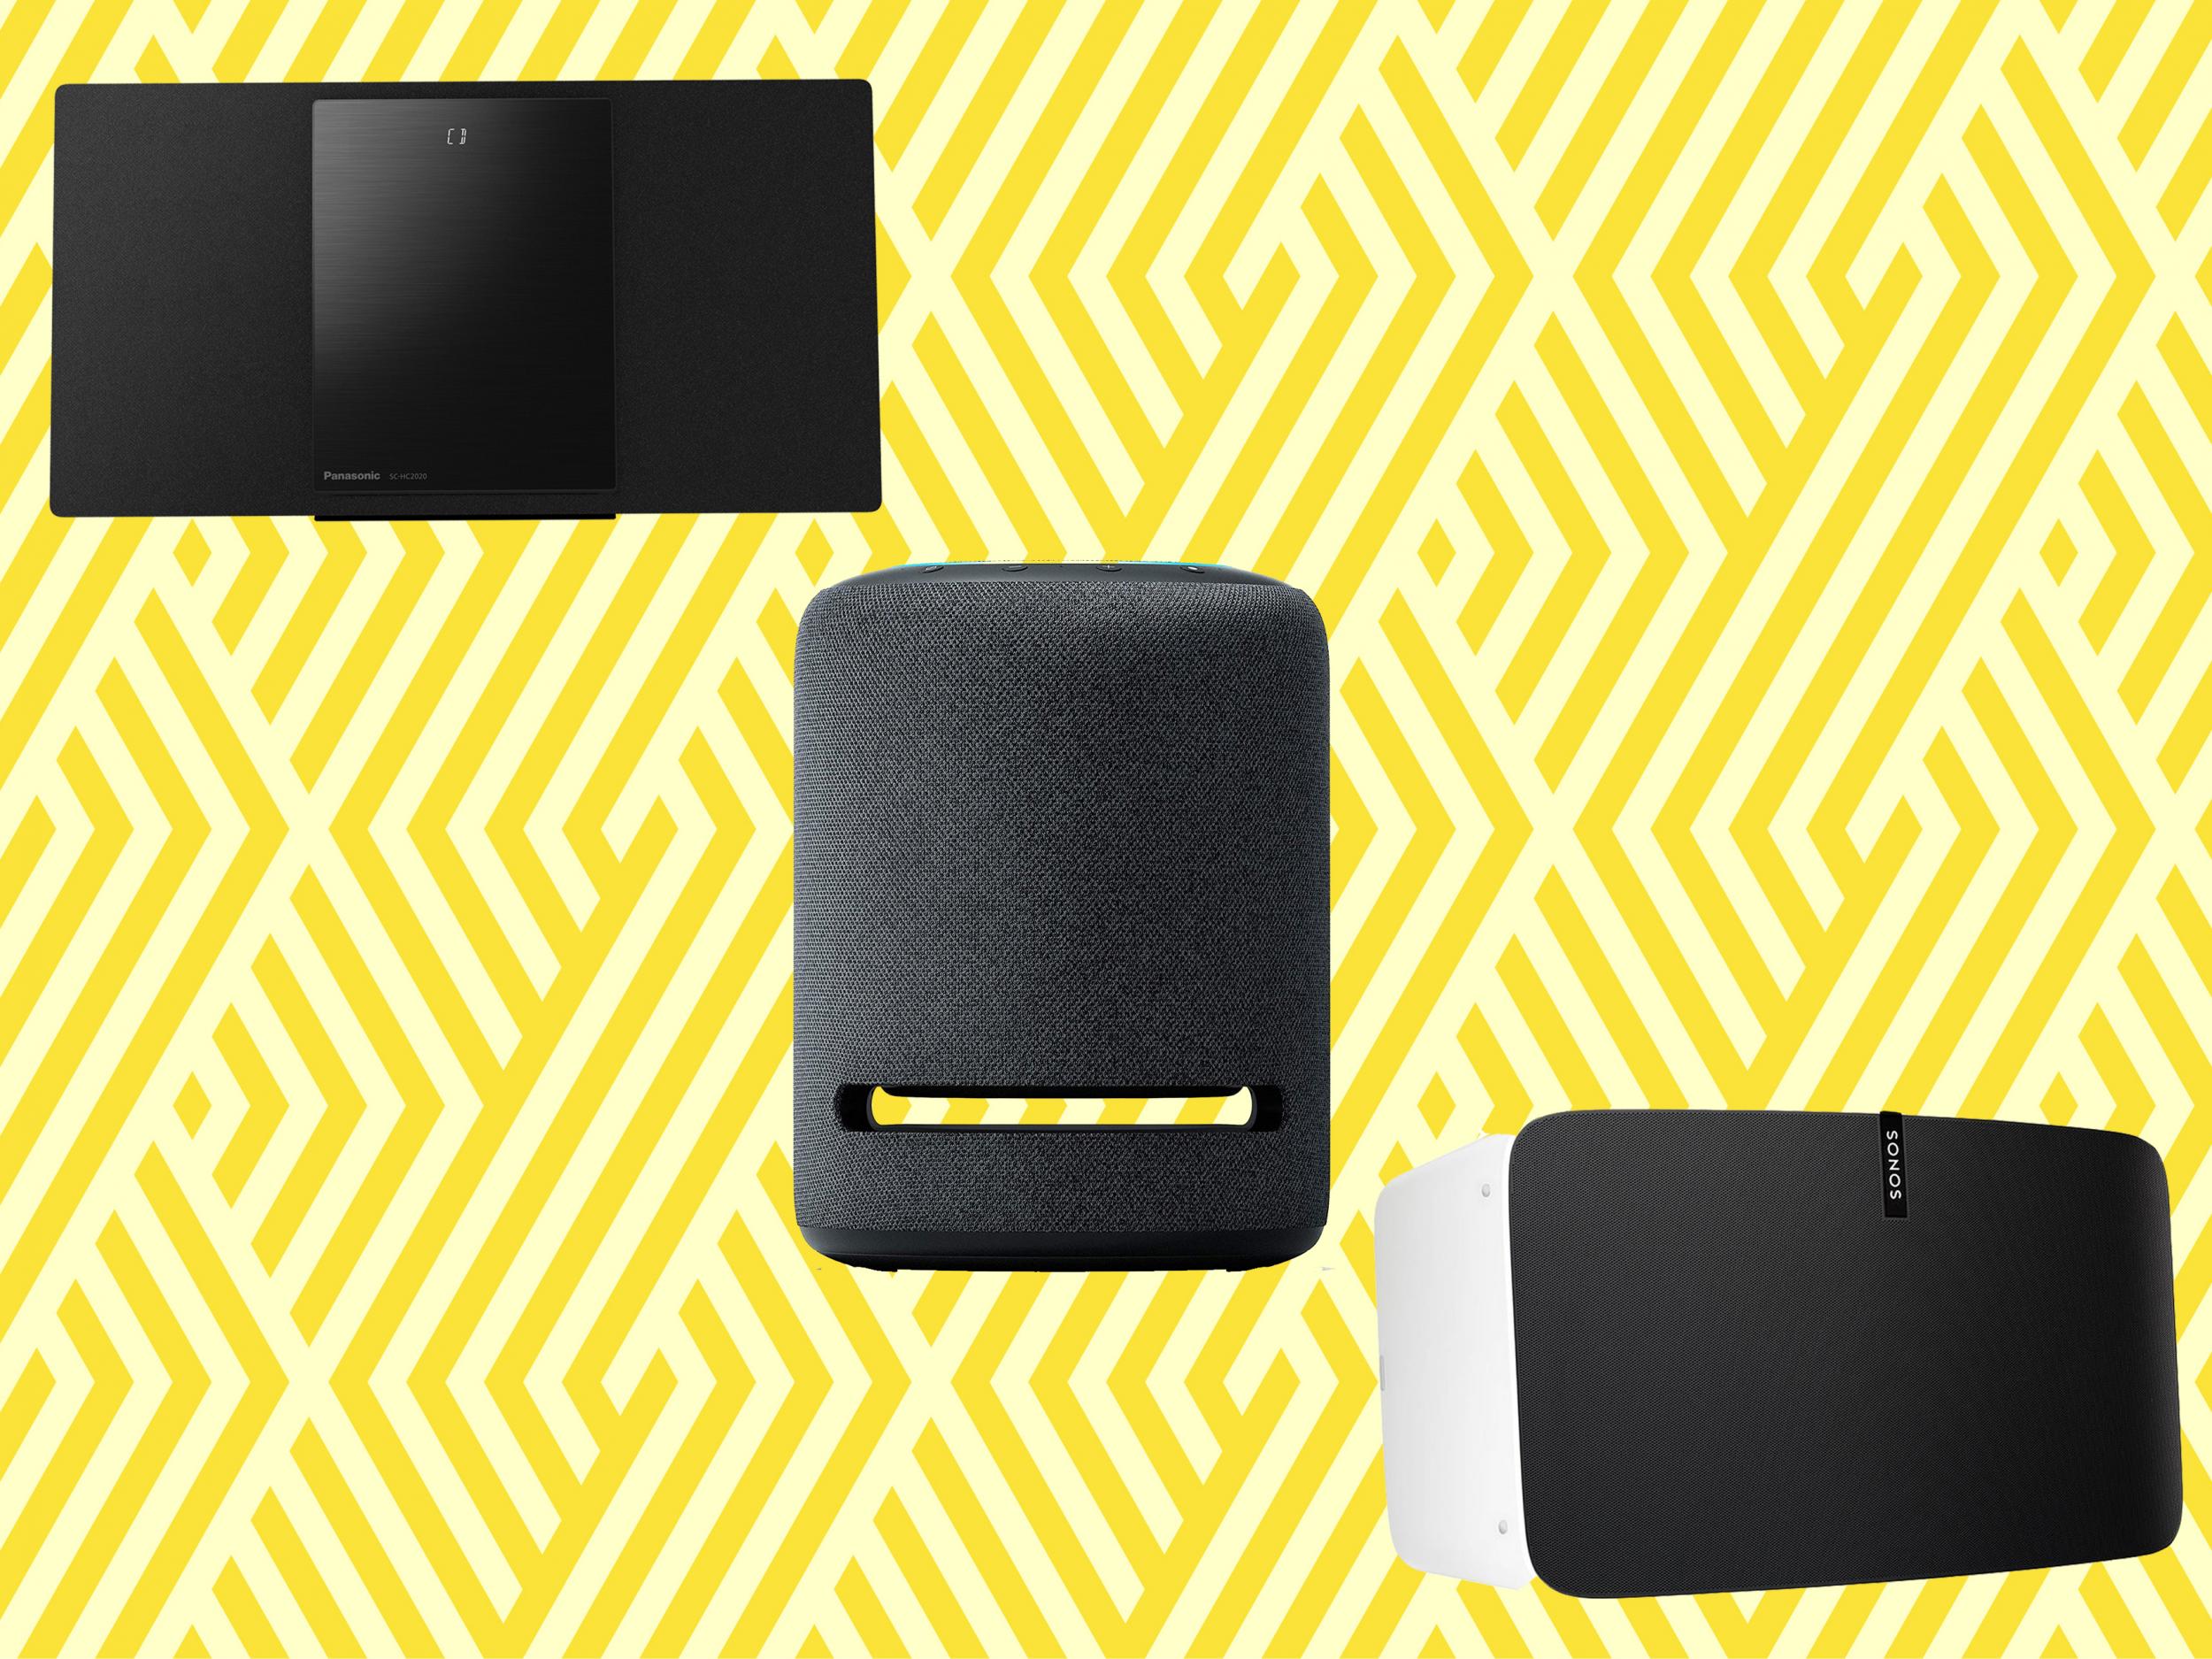 10 best multi room speaker systems for wireless sound throughout your home